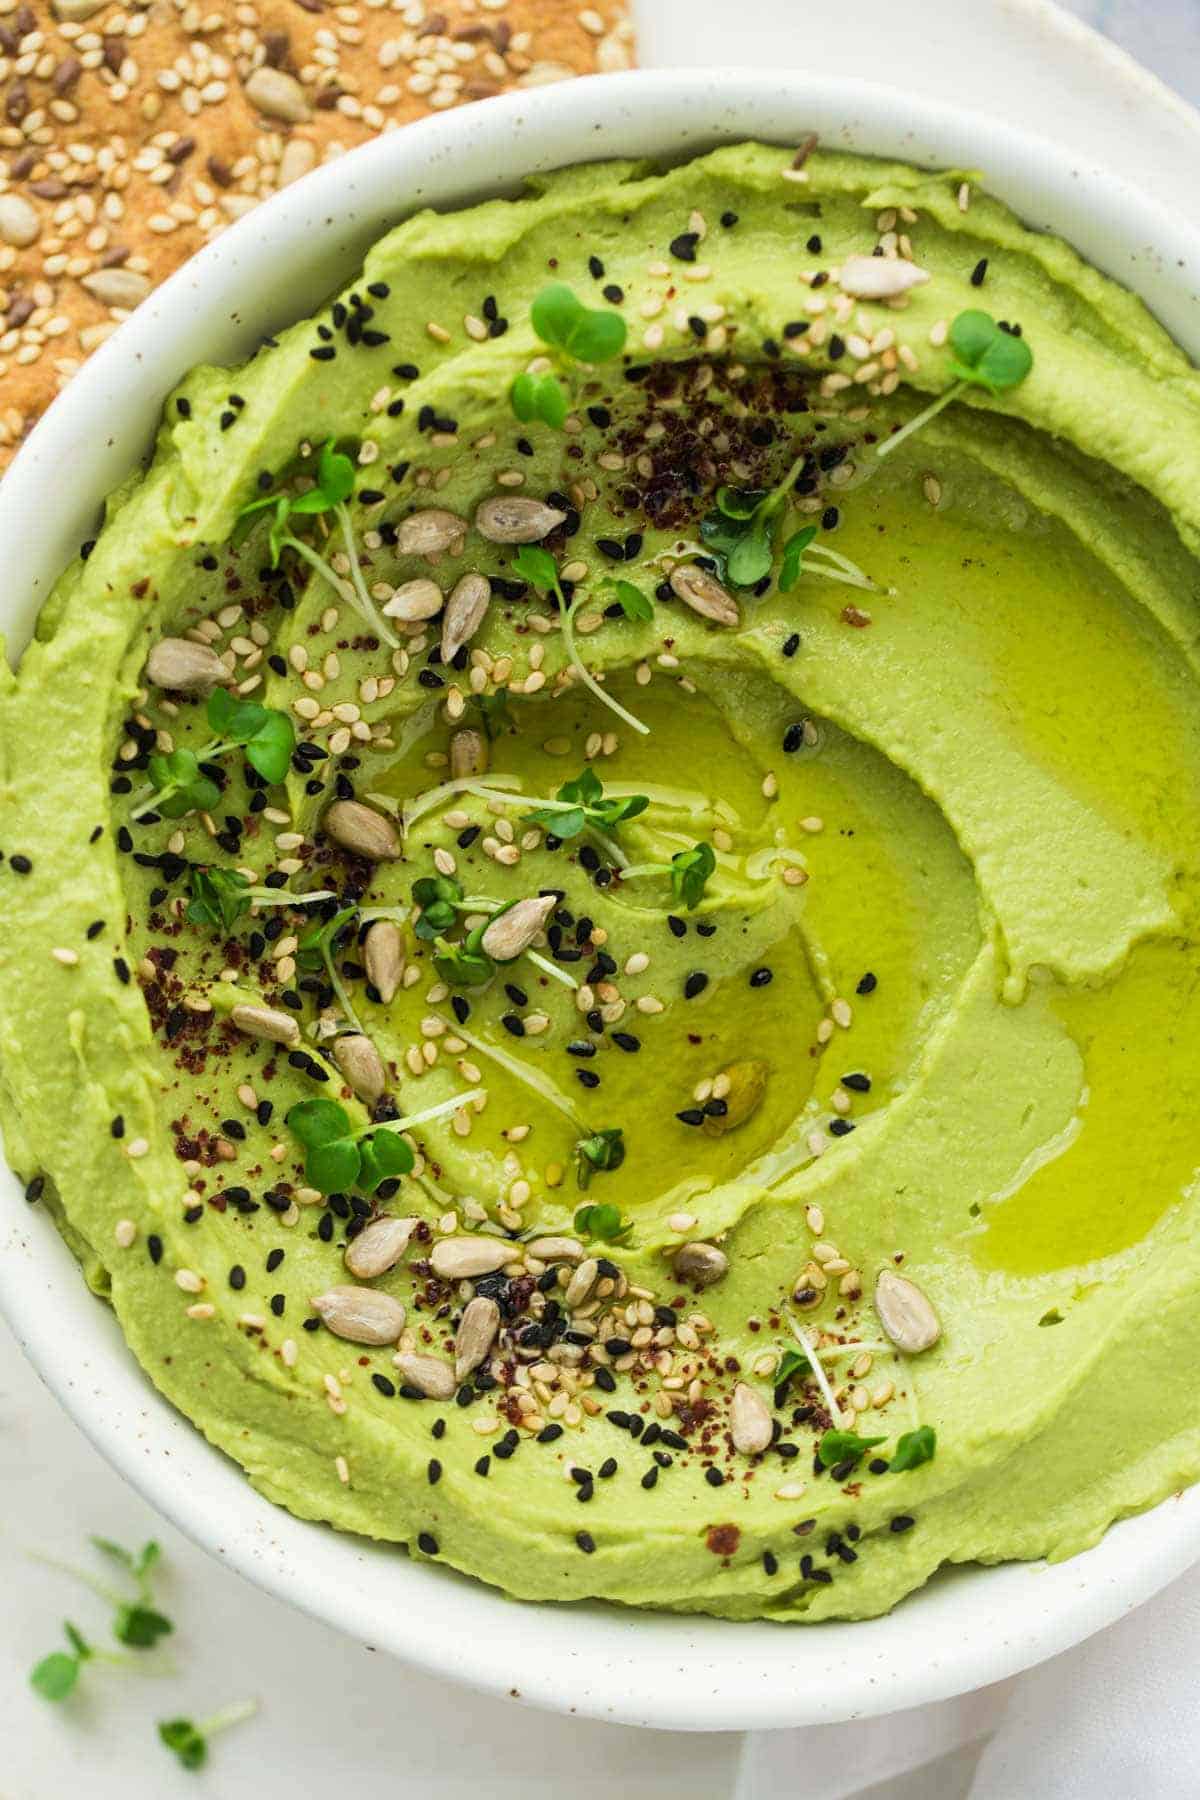 Avocado hummus in a white bowl, garnished with seeds, sumac, and microgreens.